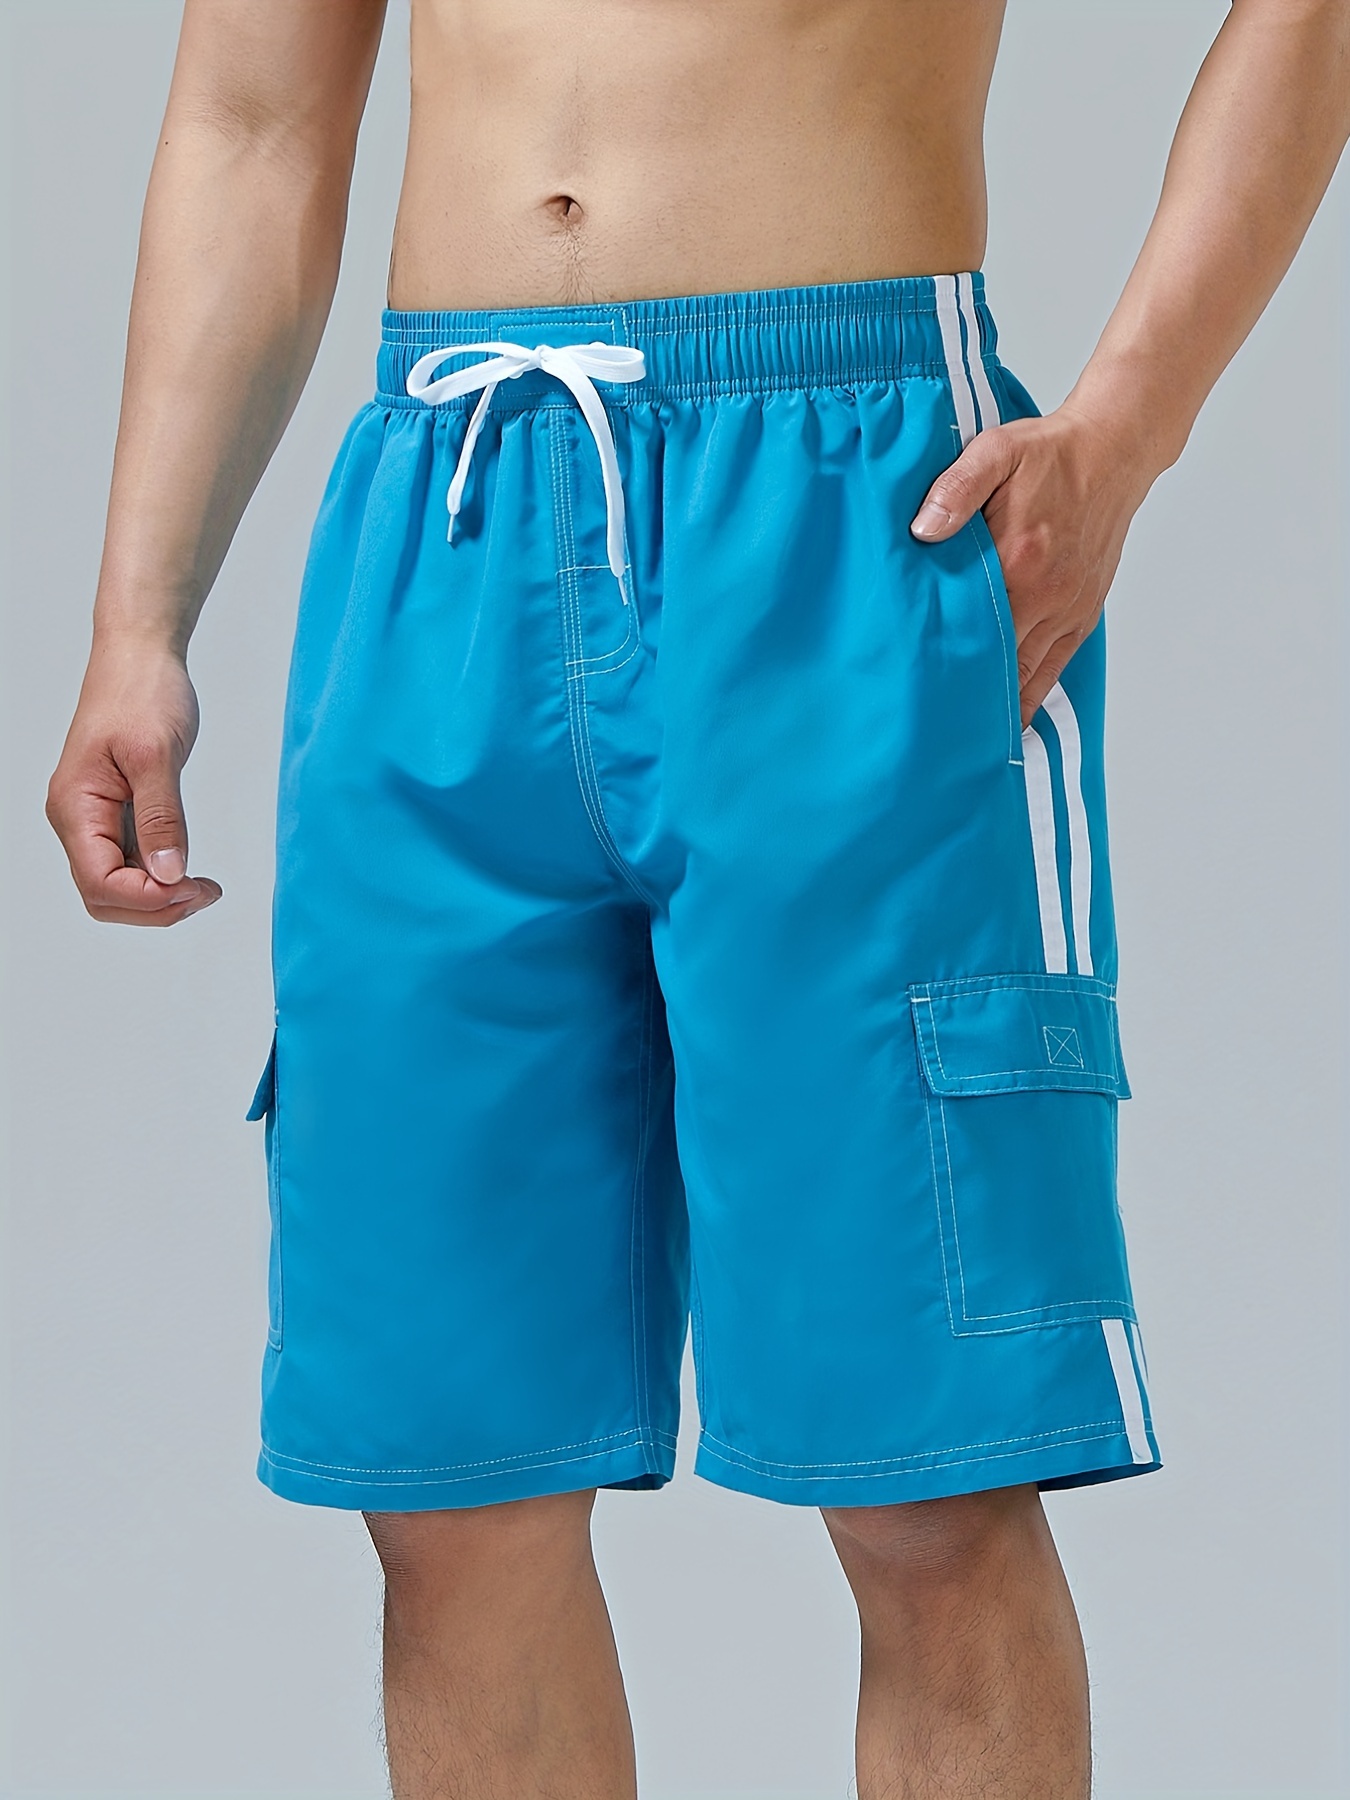 Norty Mens Cargo Solid With Stripe Boardshort Swim Trunks